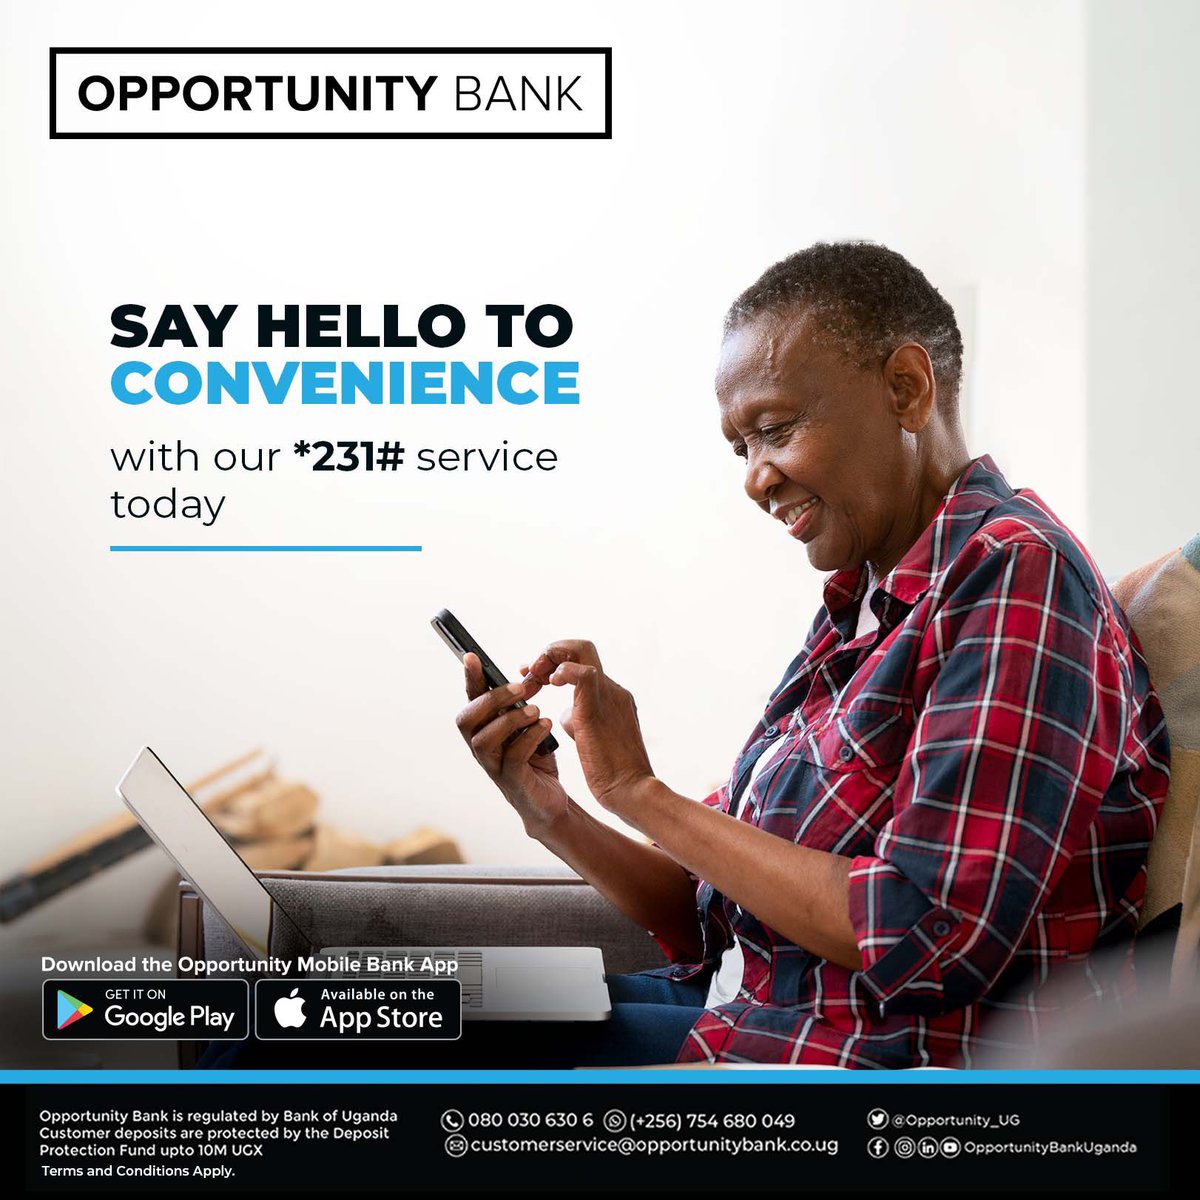 Transact and keep track of your account at the comfort of your home. Simply register for Opportunity Kussimu (*231#) #Mobilebanking